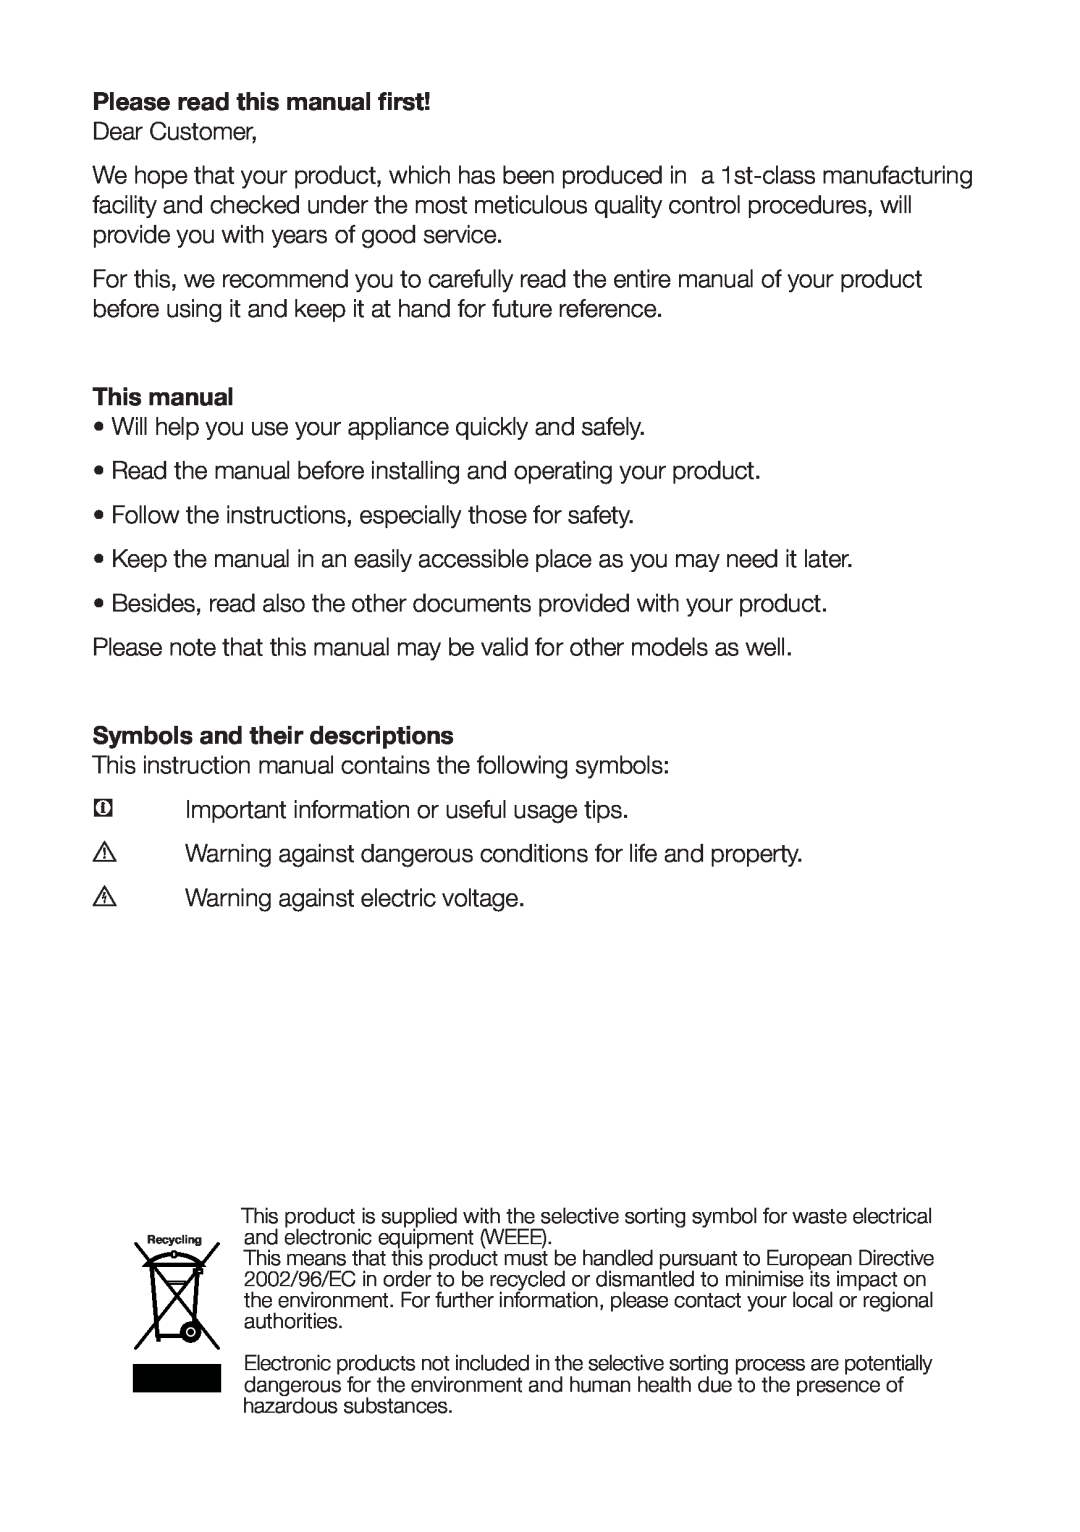 Beko GNEV021APW Please read this manual first, This manual, Symbols and their descriptions 